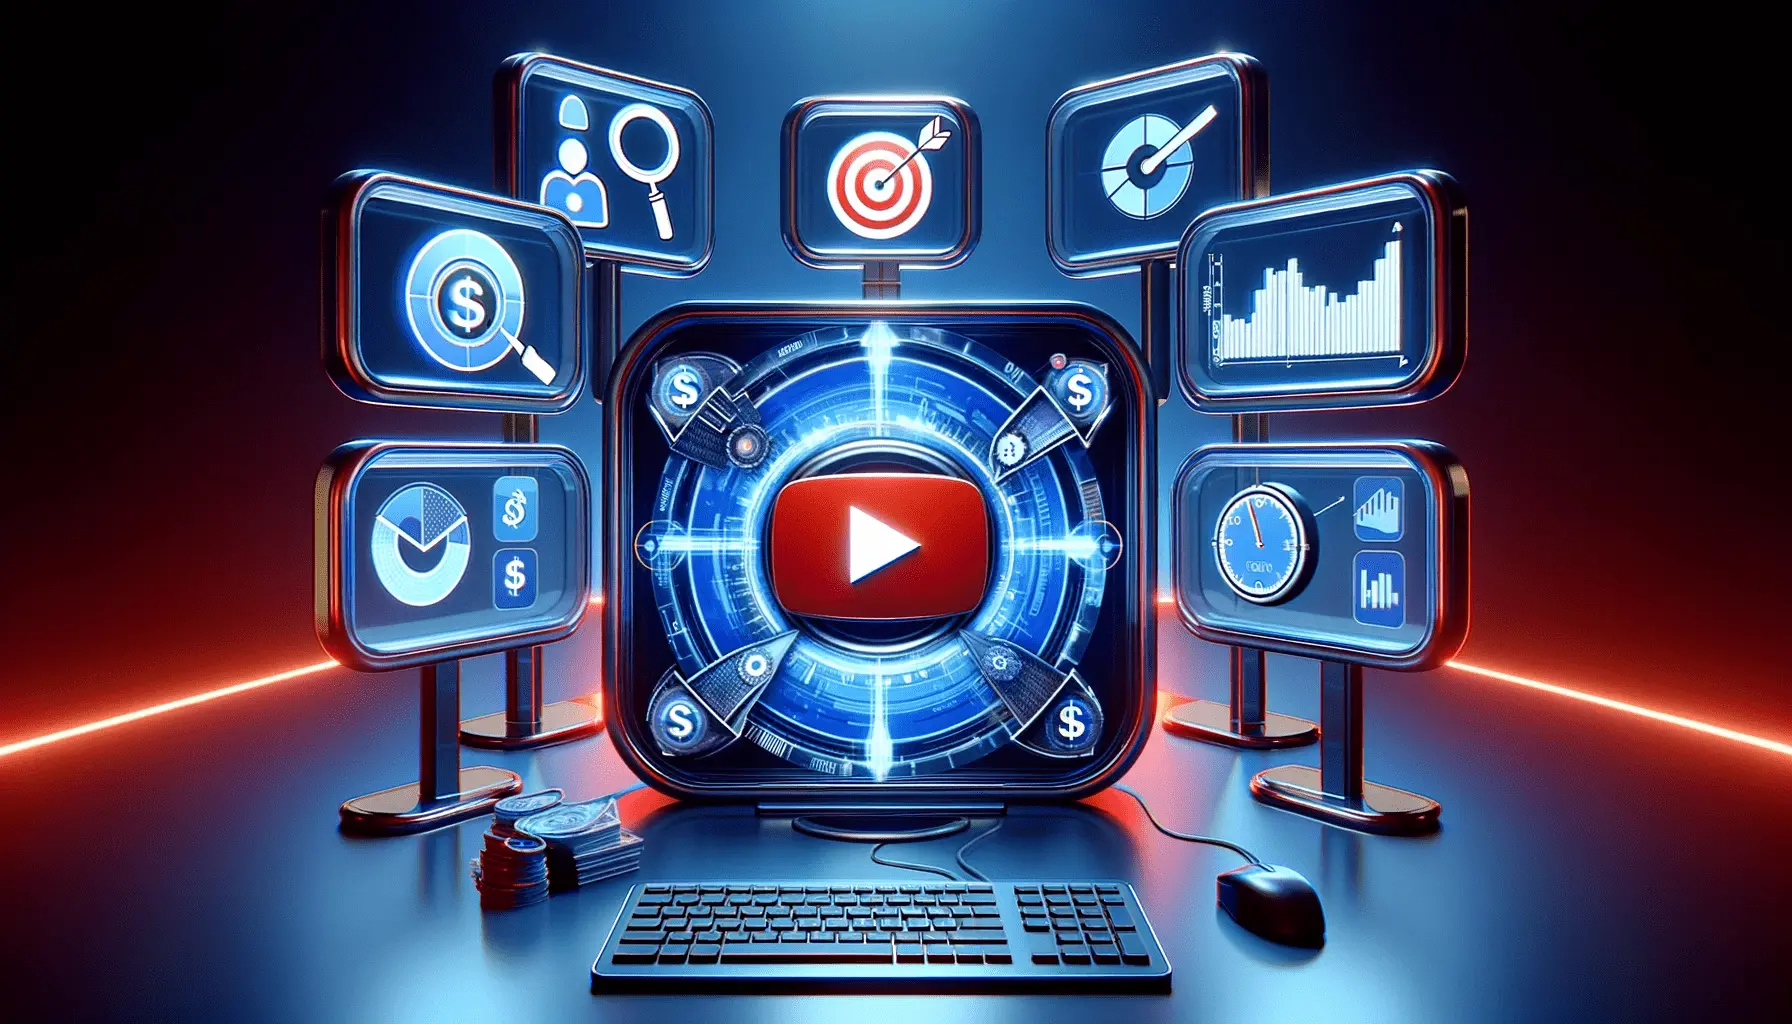 5 Retargeting Tactics for YouTube Ads